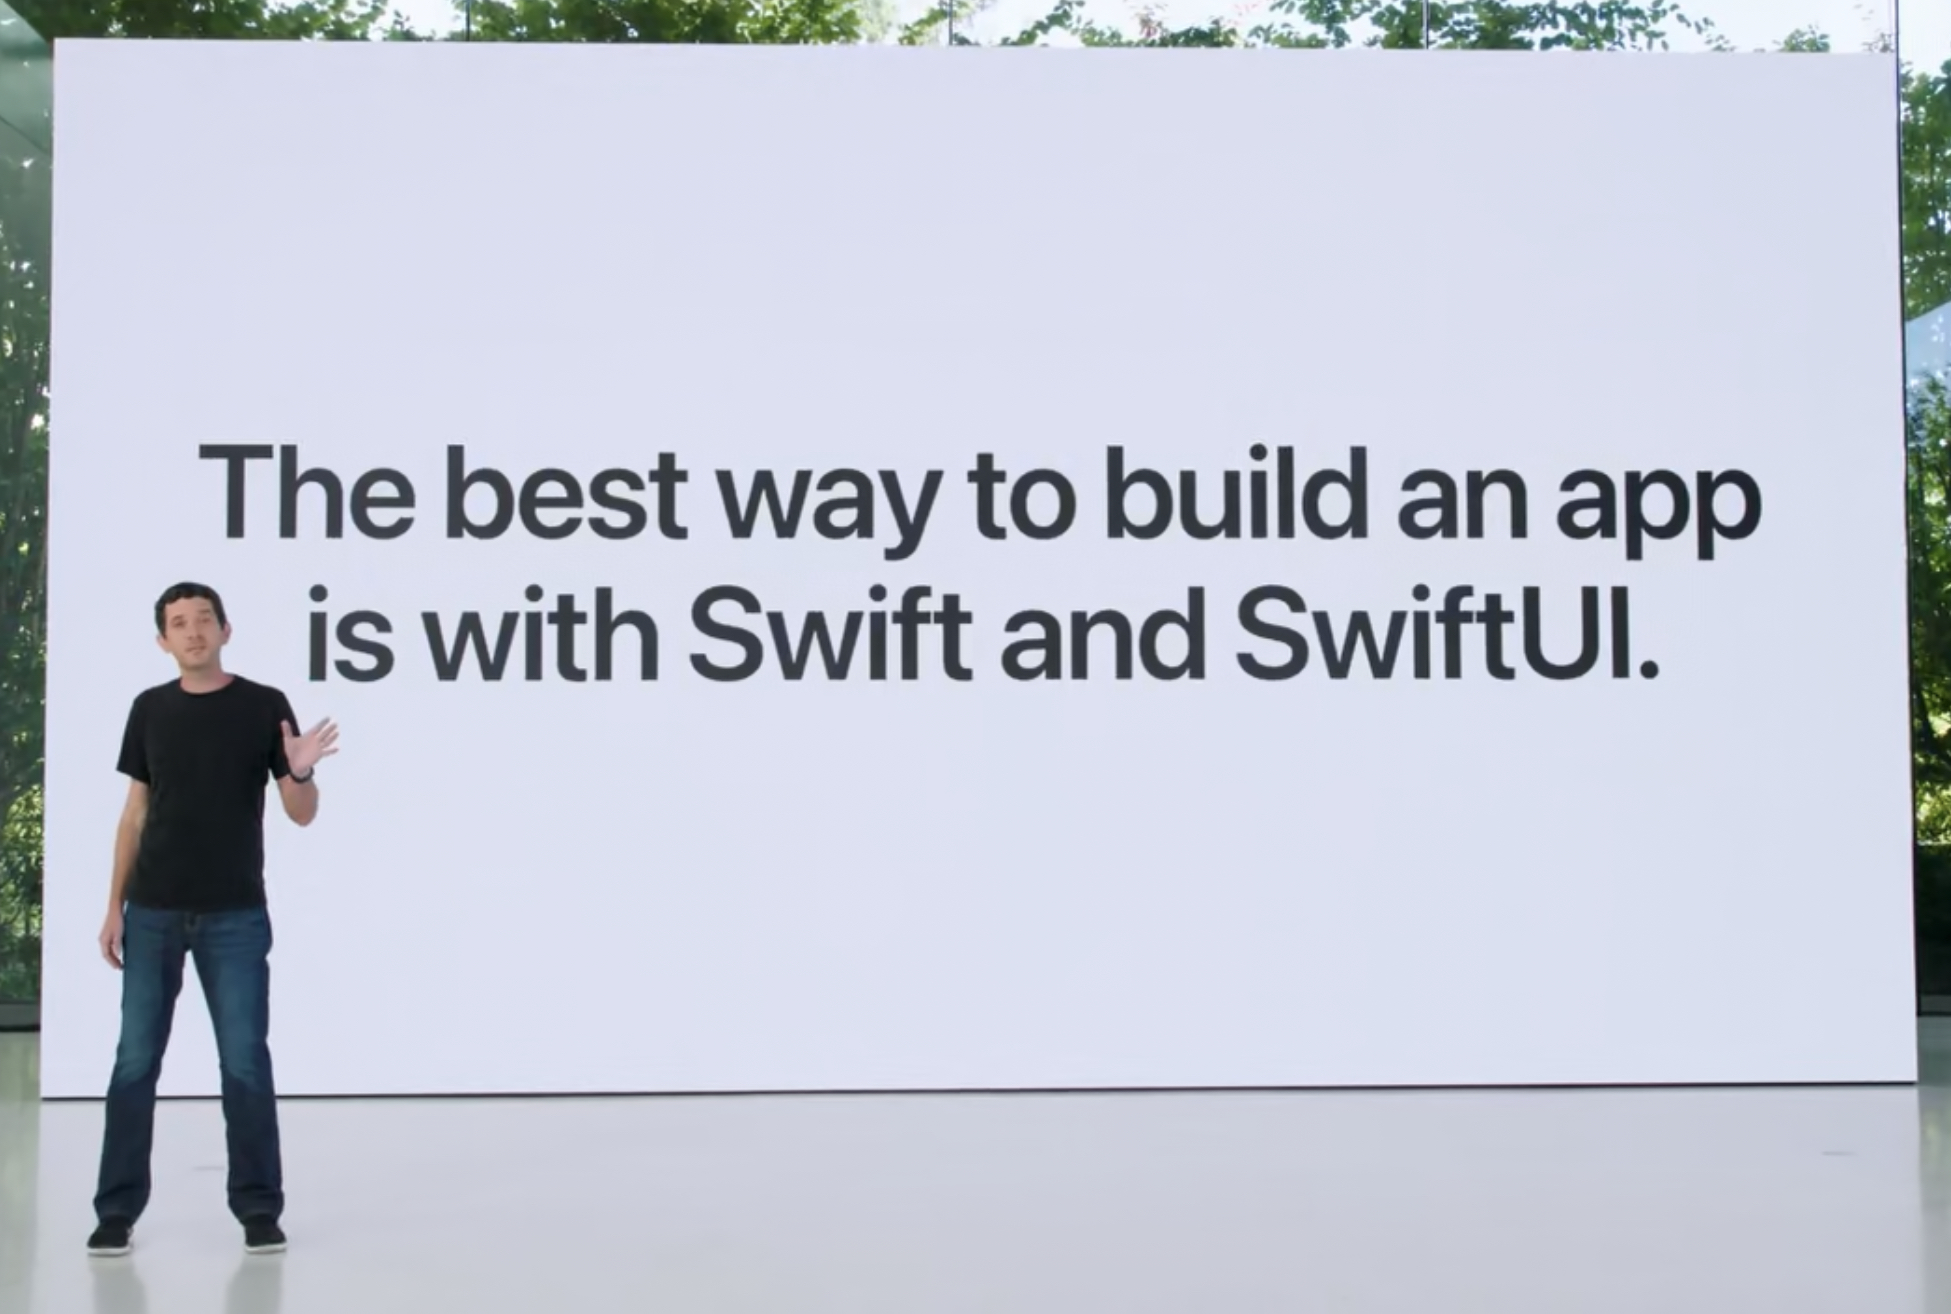 The best way to build an app is with Swift and SwifUI